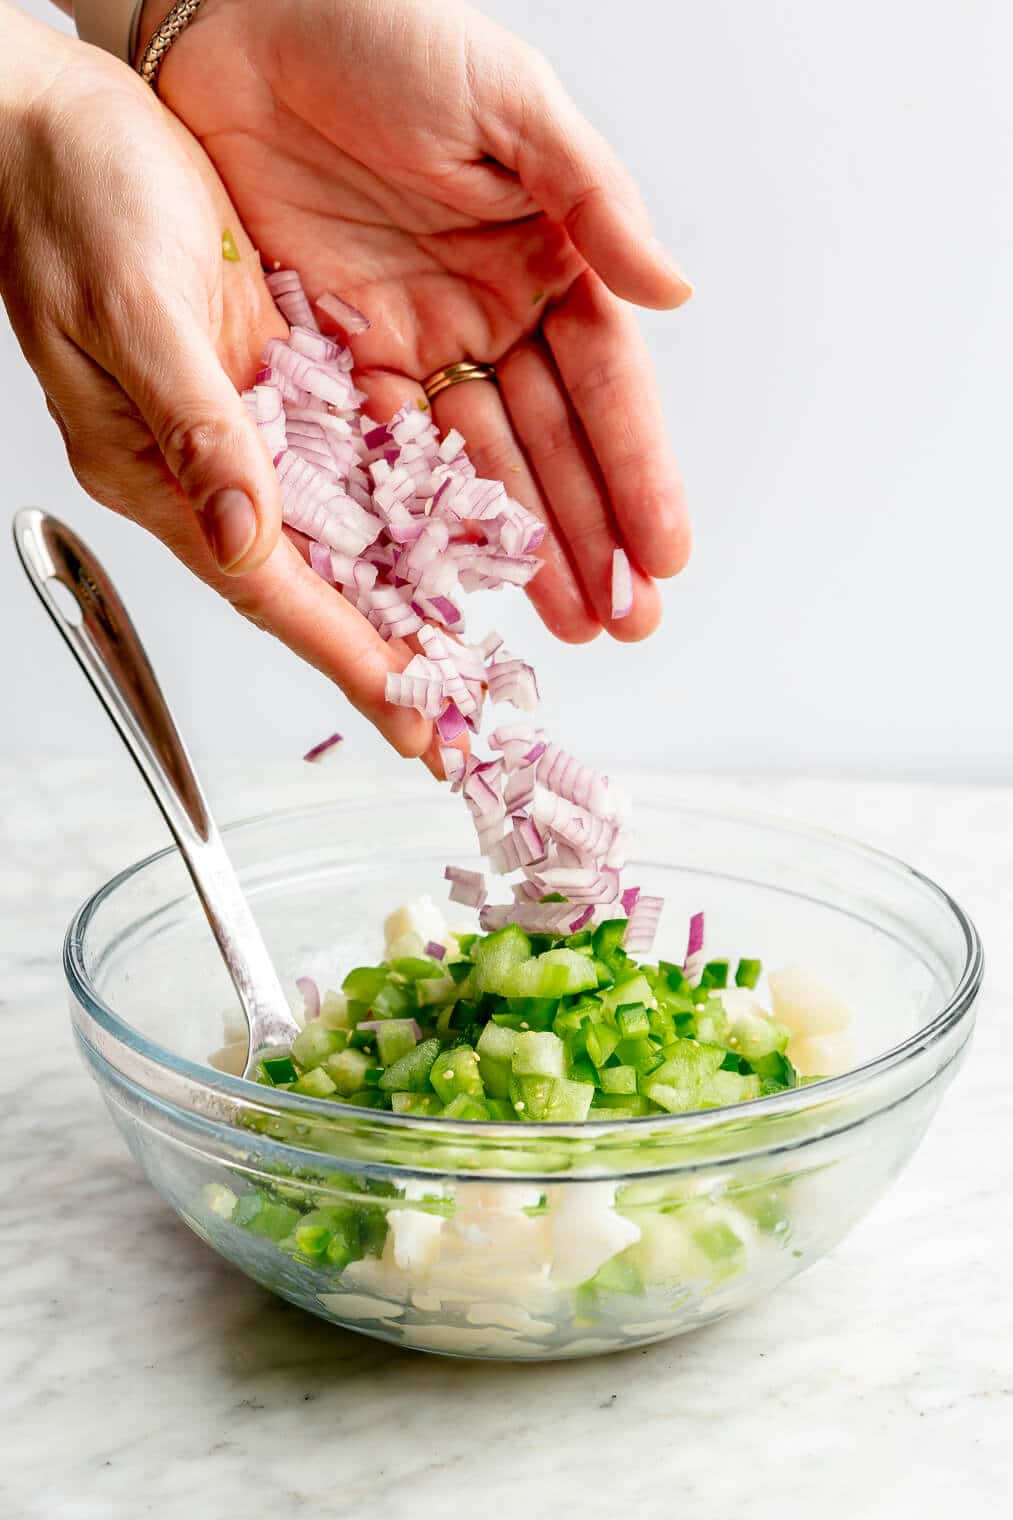 Hands dropping diced red onion into a large glass bowl with cubed white fish and veggies.